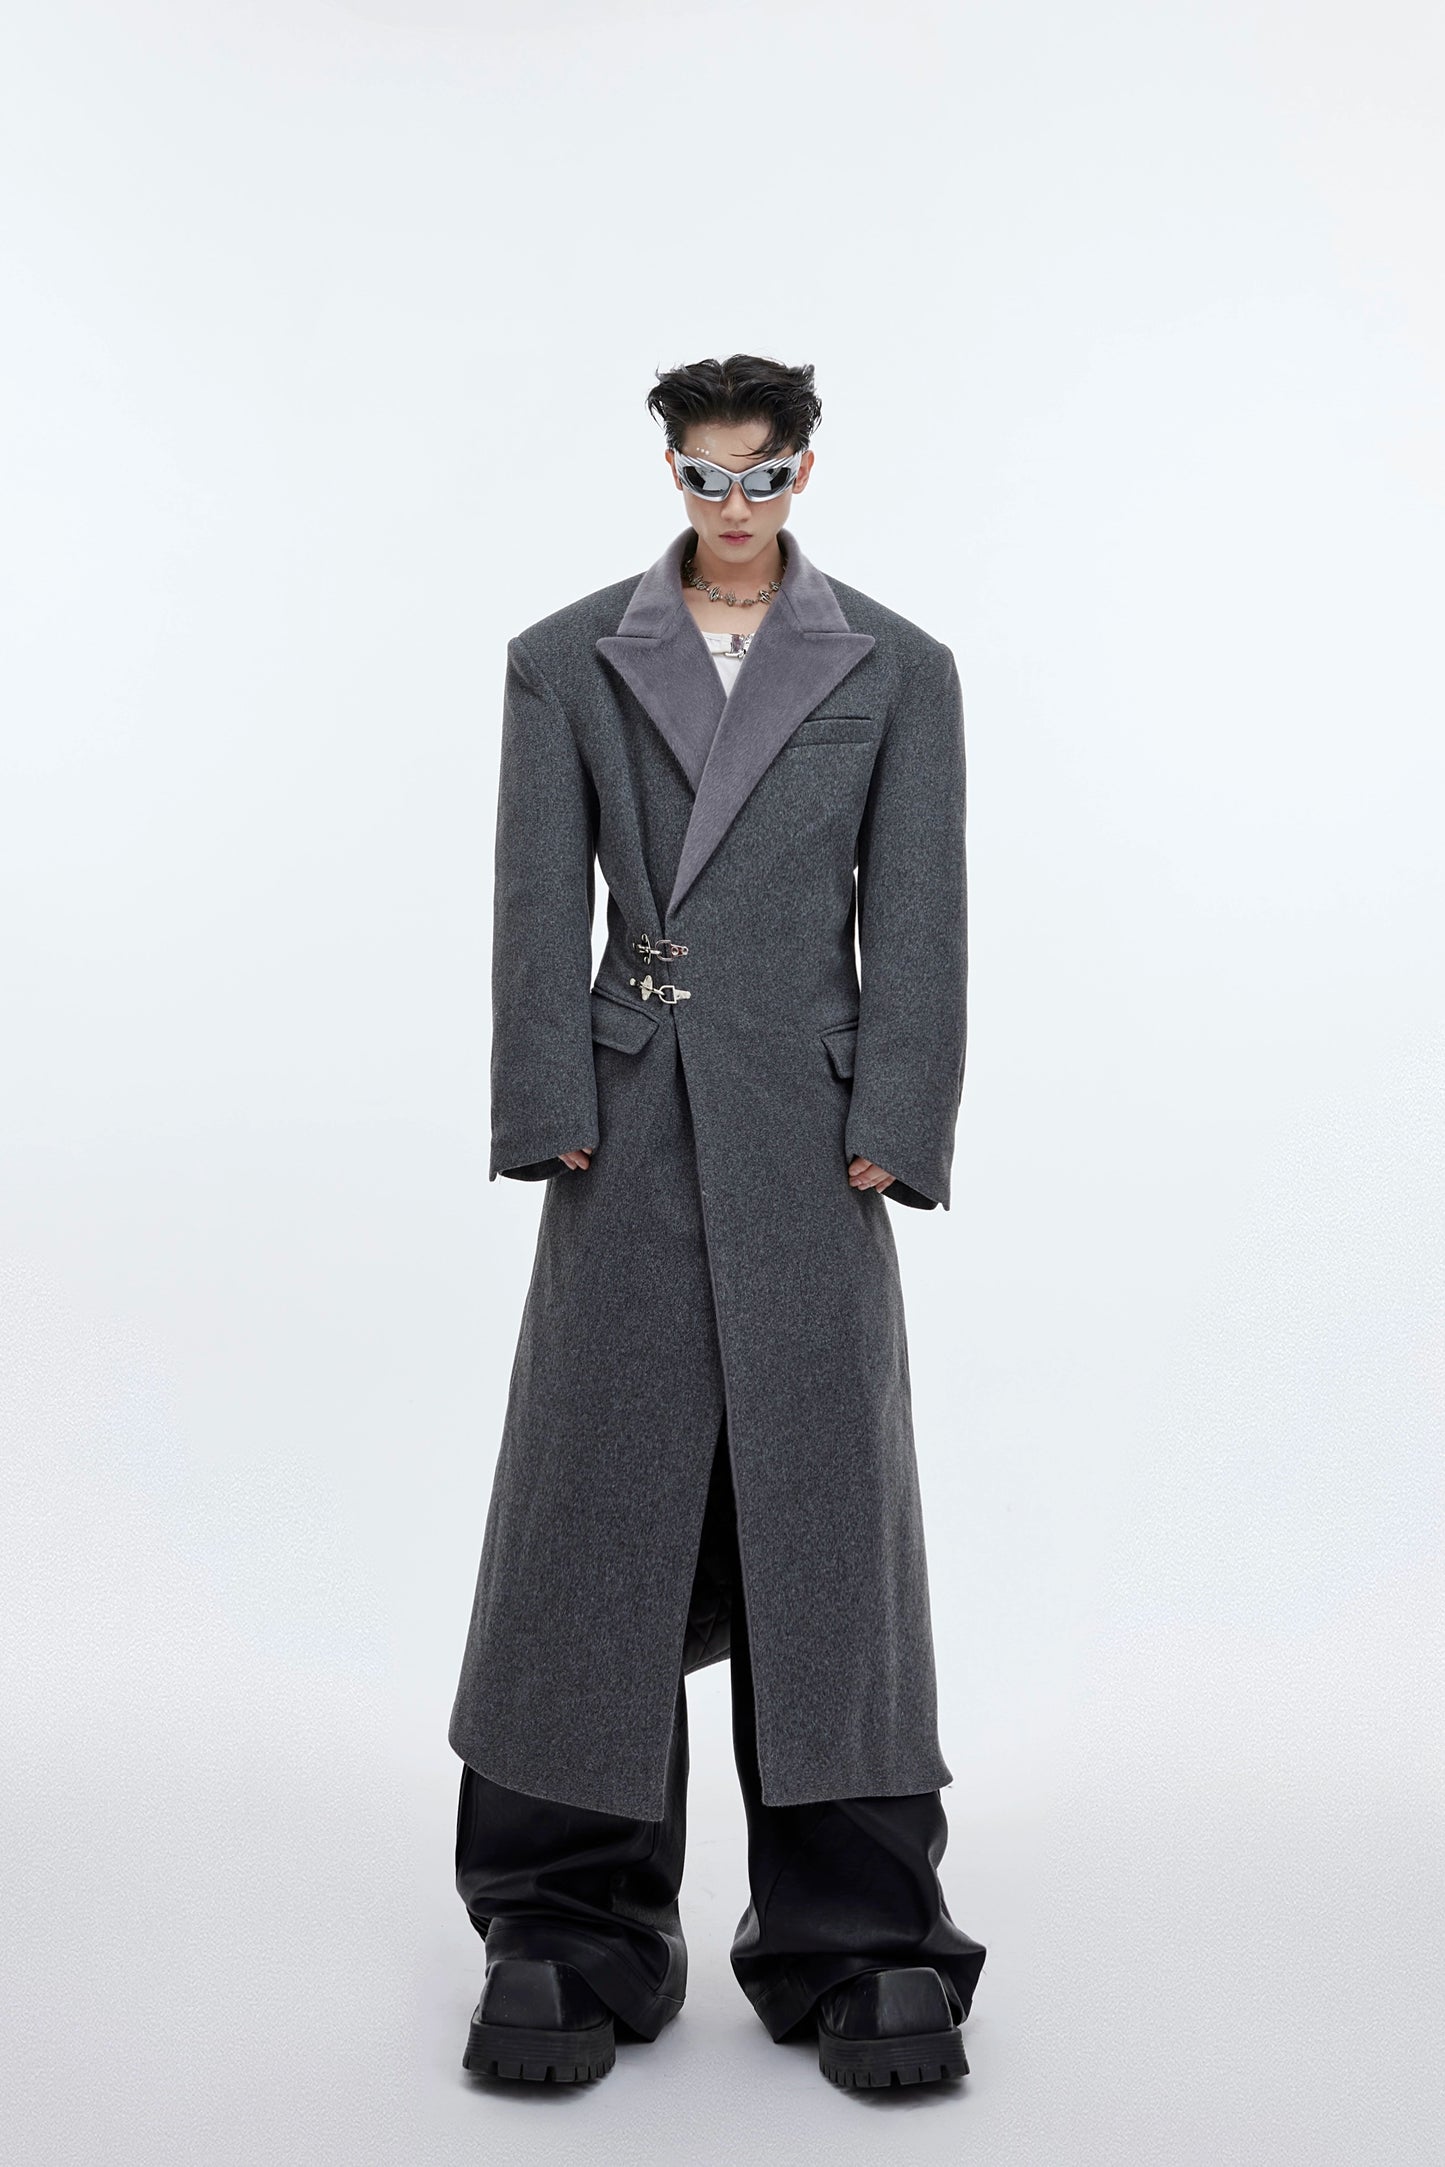 CulturE niche deconstructs the waist-cinching silhouette of a woolen coat with metal buckles and a long over-the-knee tweed jacket